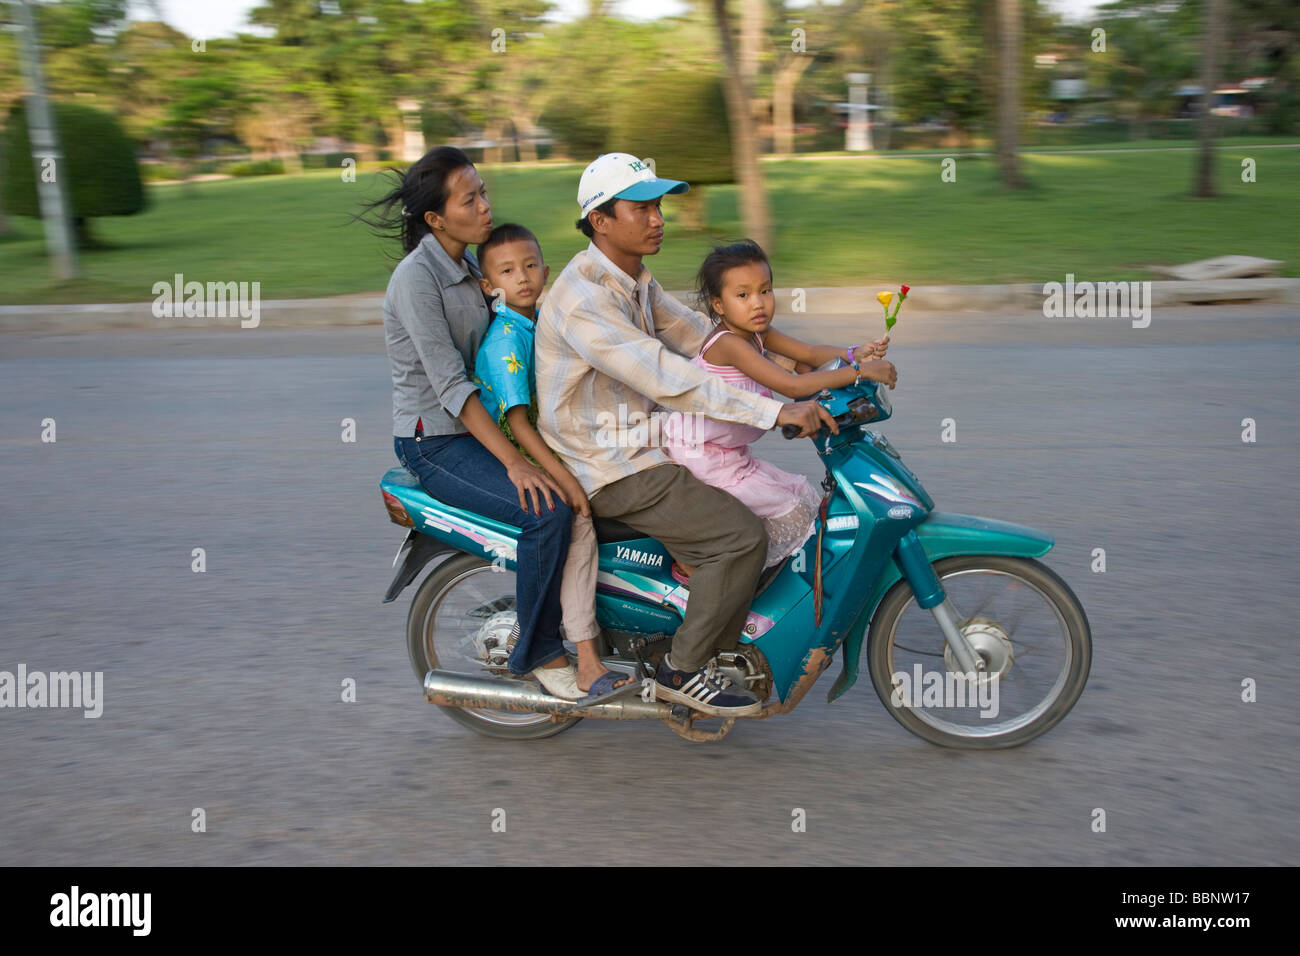 Siem Reap,Cambodia;Family riding on a scooter together without safety helmets Stock Photo